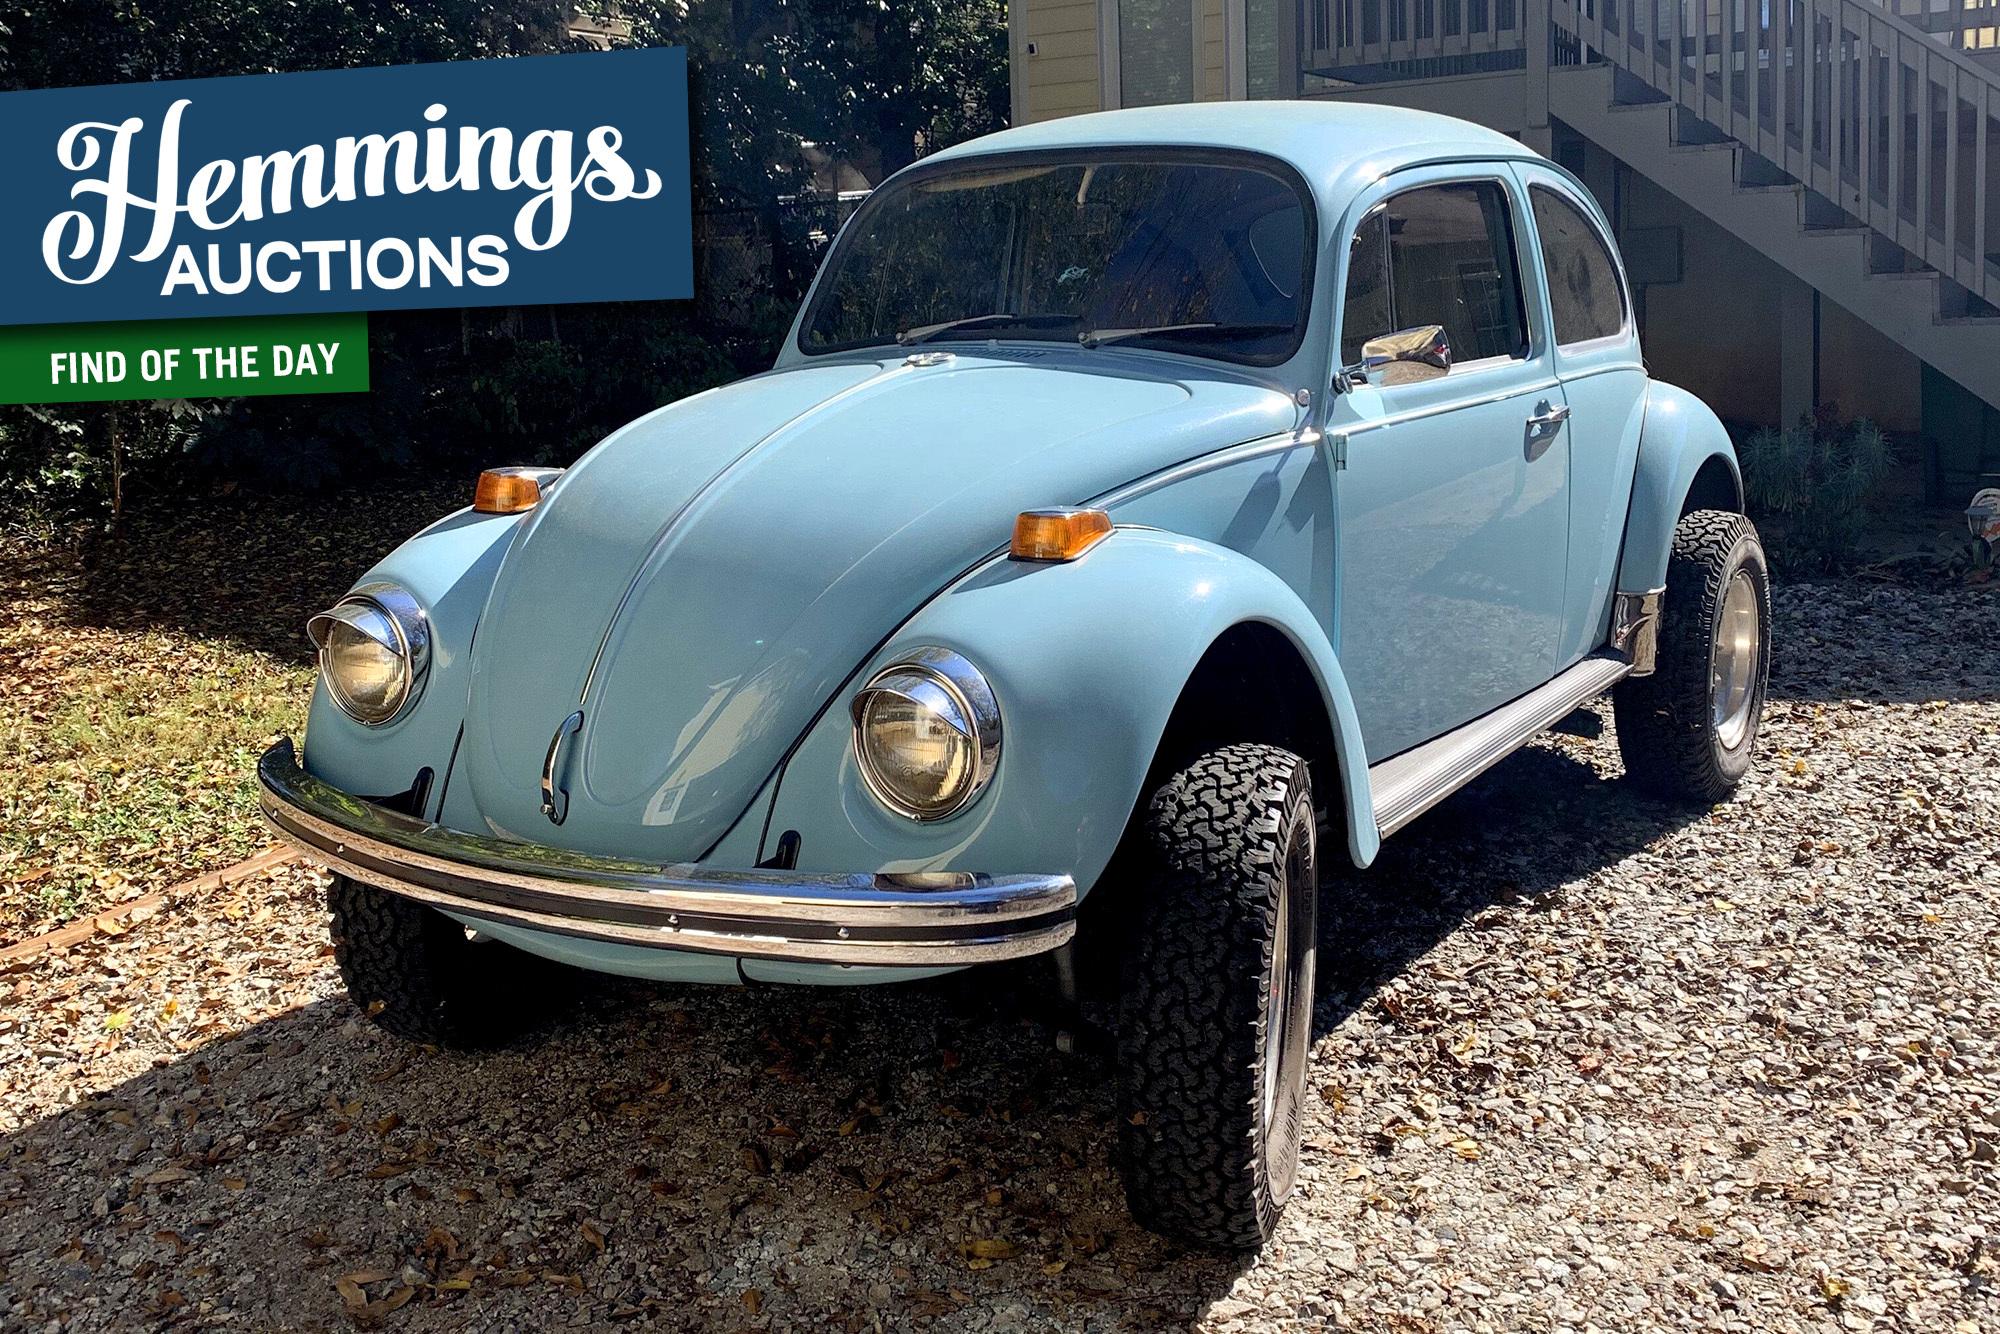 Lifted 1971 Volkswagen Beetle Is Your Basic Commuter Car Made Burlier